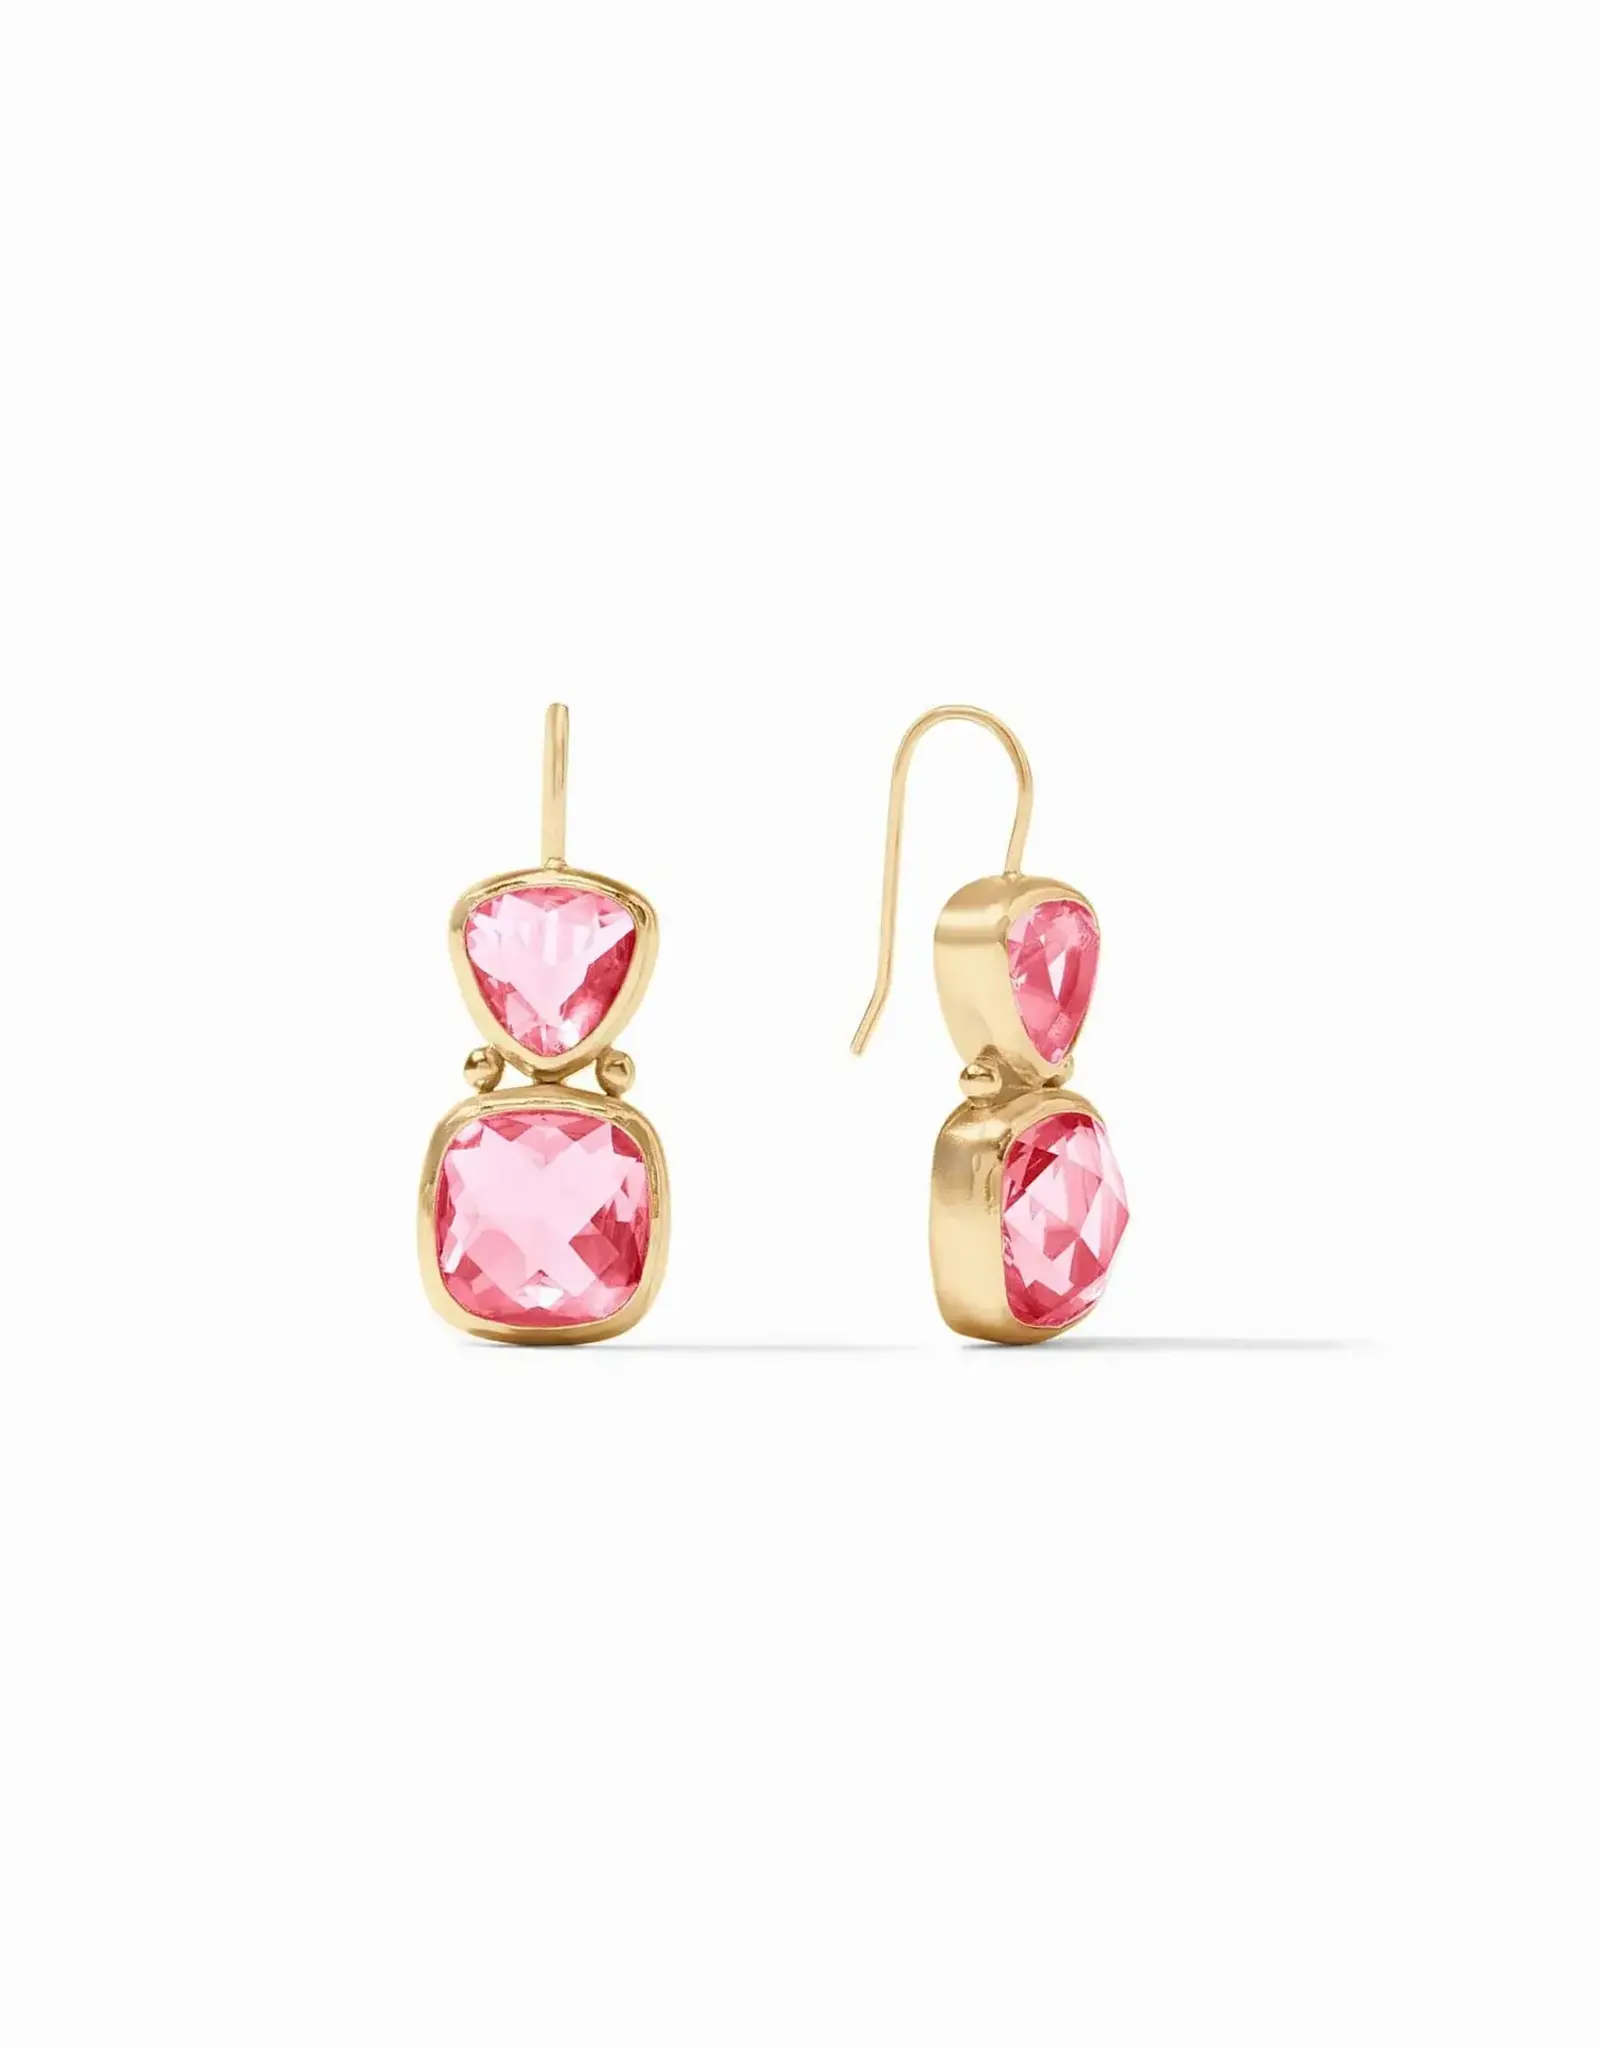 Julie Vos Julie Vos Aquitaine Earring Peony Pink